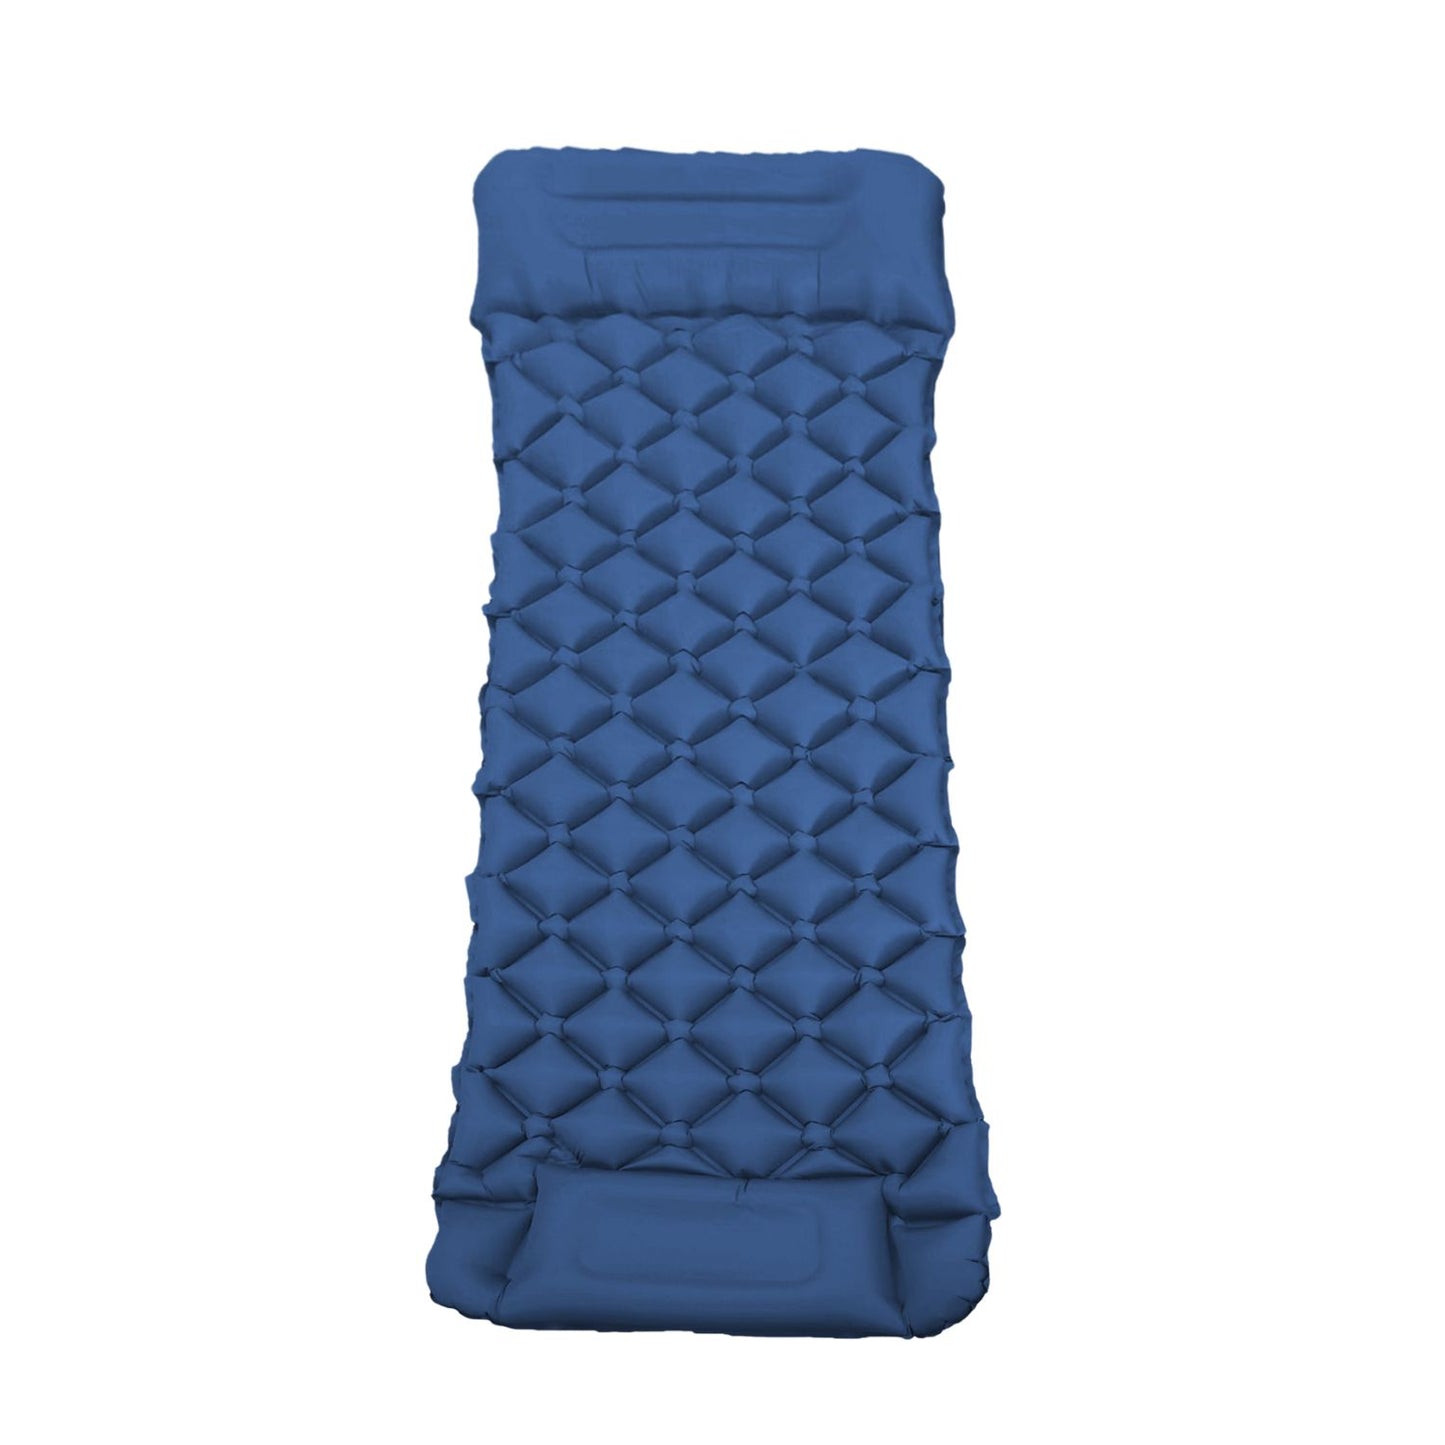 Premium Inflatable Camping Sleeping Pad with Integrated Pillow in Navy Blue